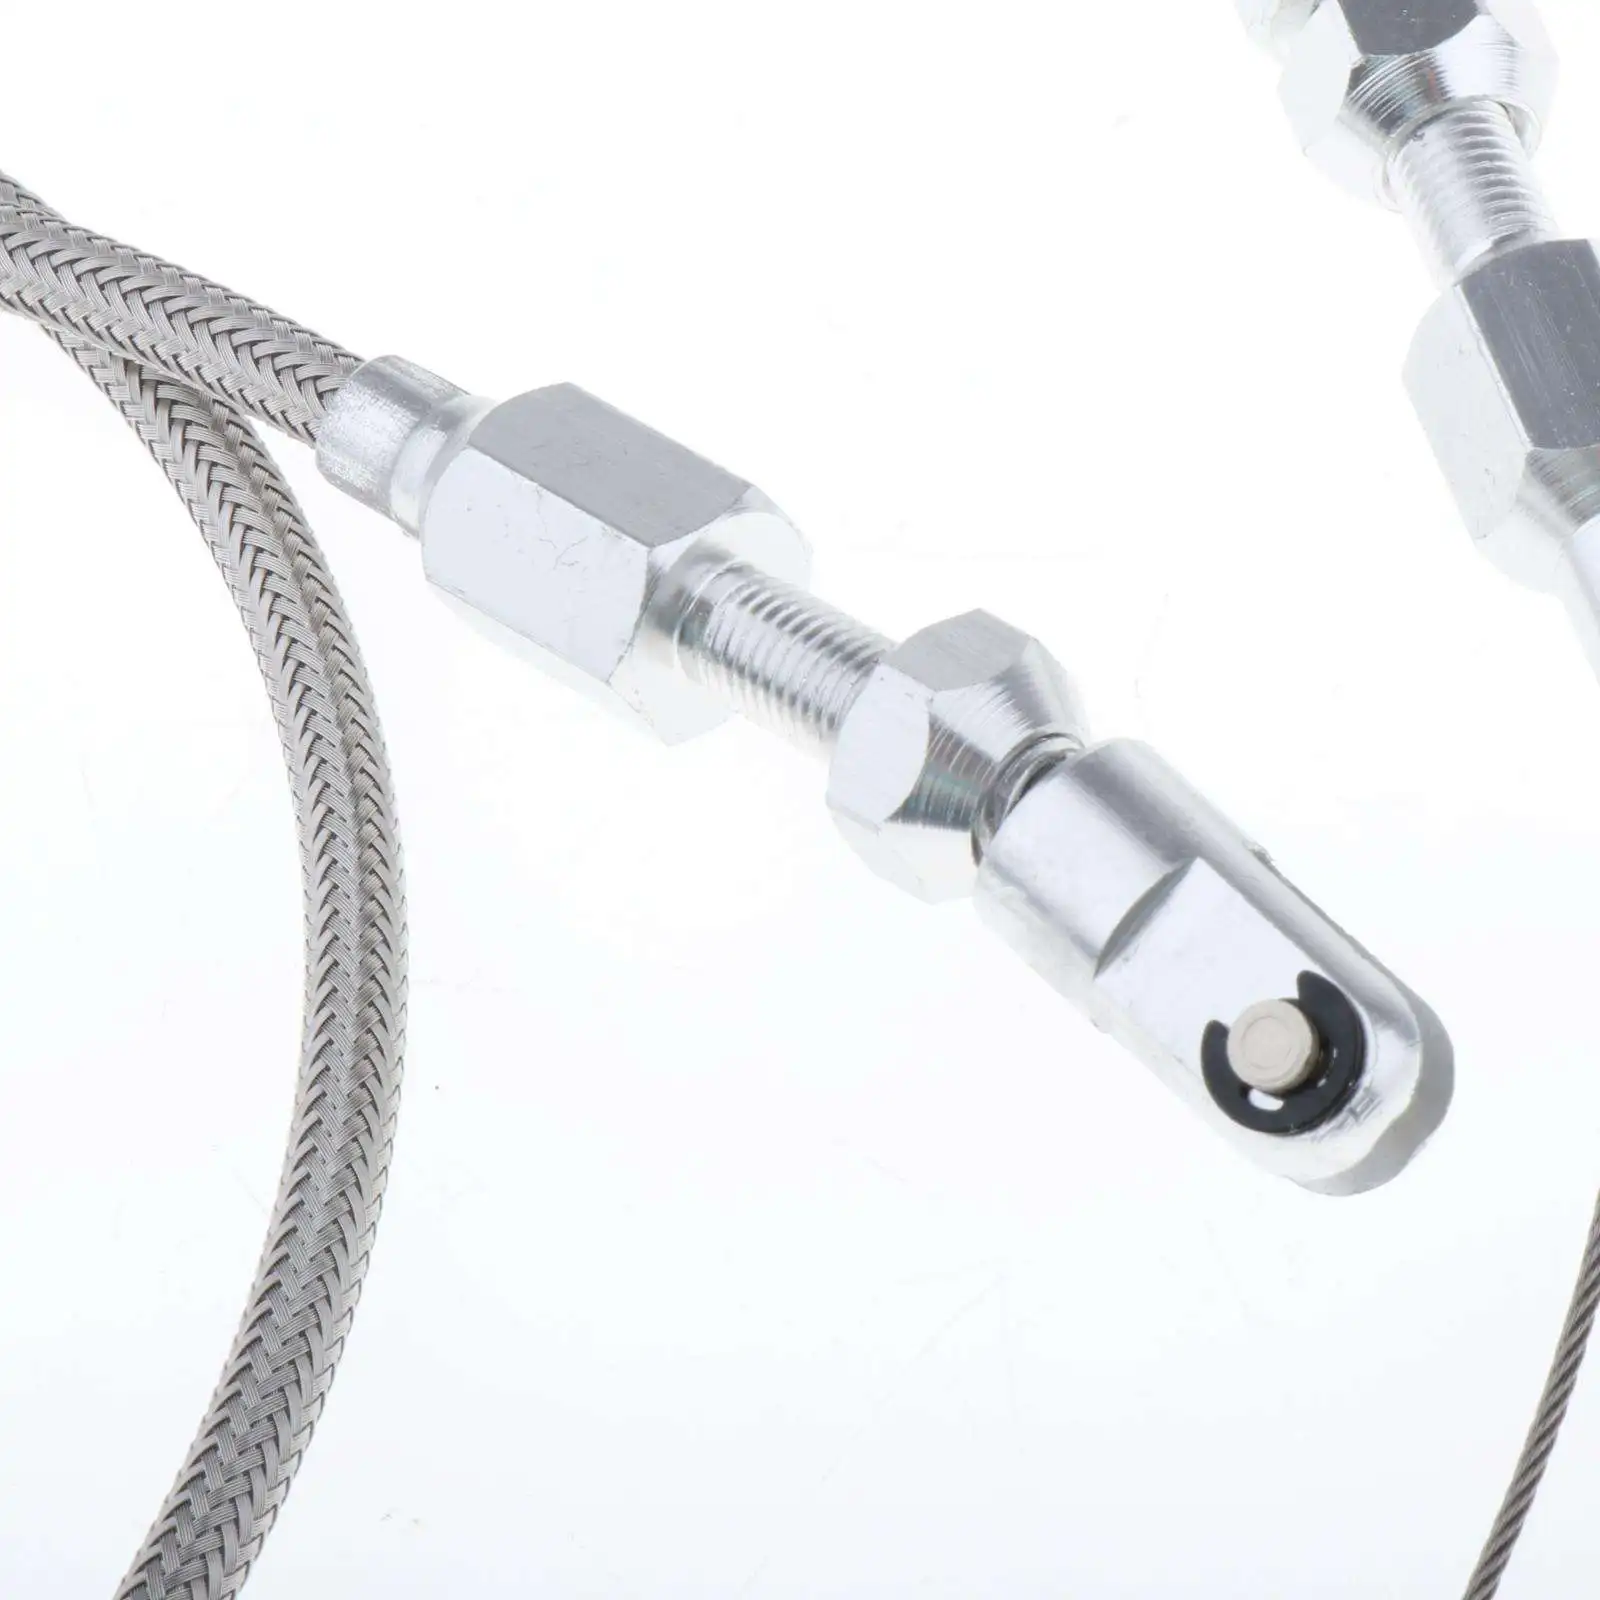 Stainless Steel Throttle Cable with Fittings, Silver, 56inch Stainless Steel Cable, 36inch Housing